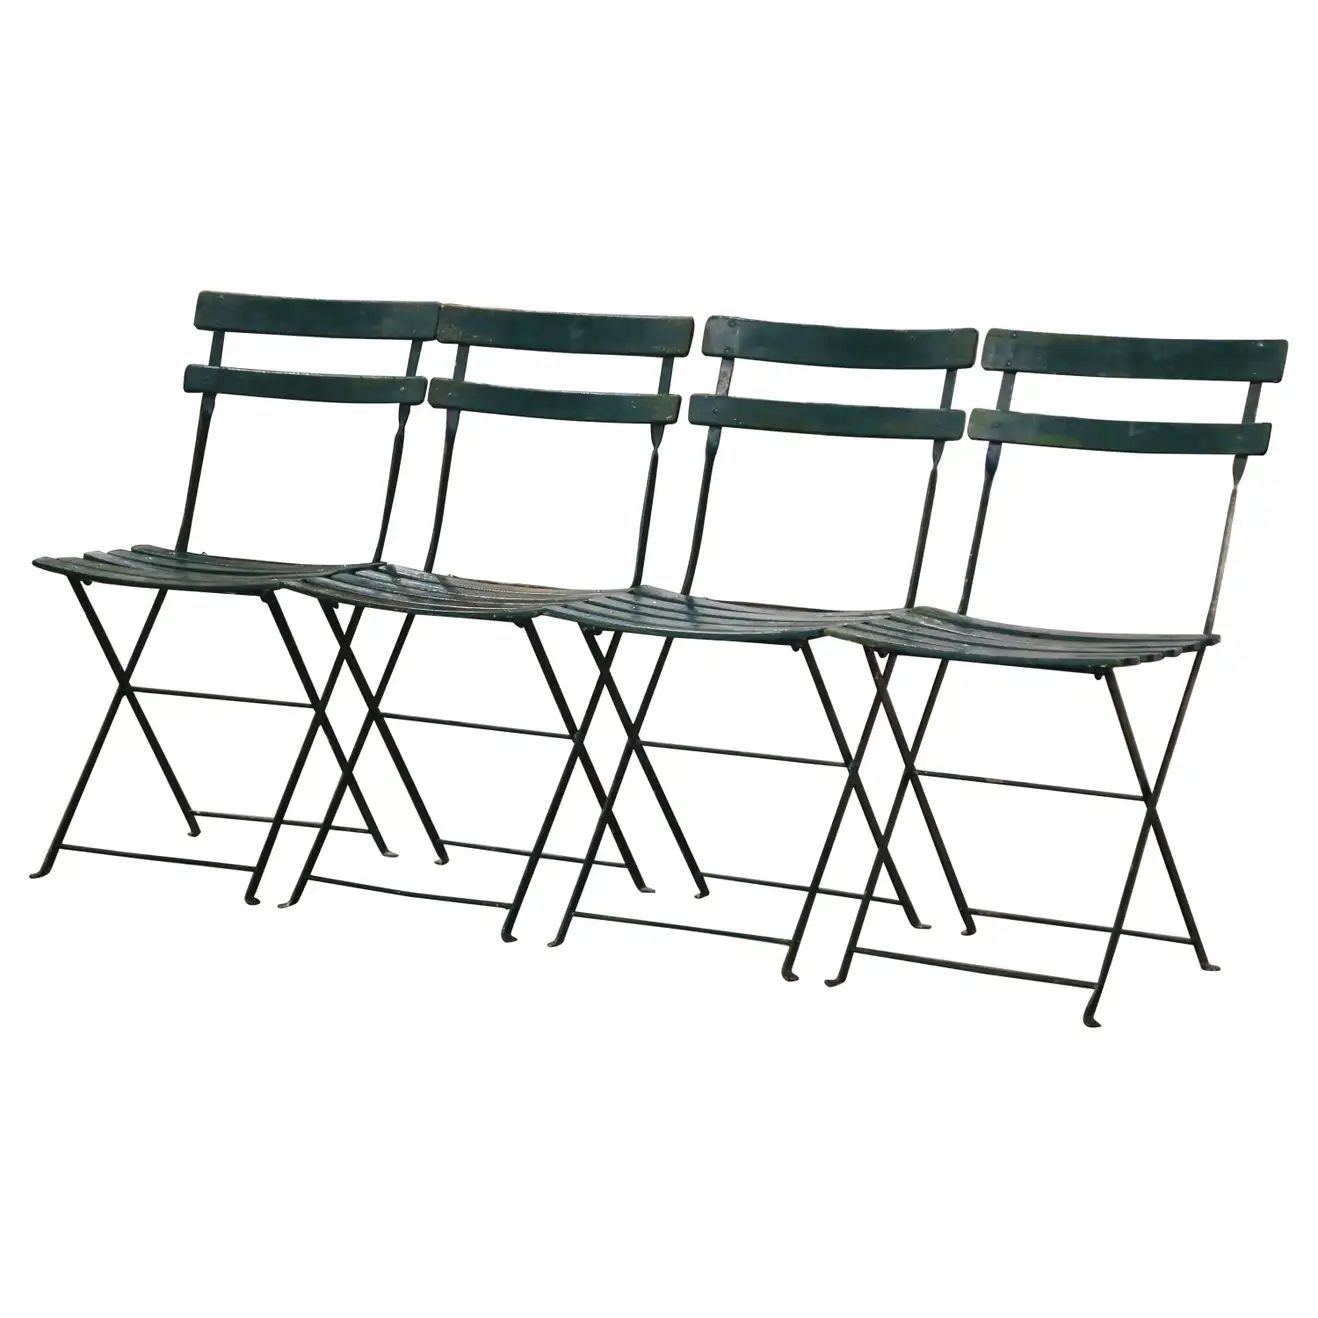 Midcentury French Green Painted Wood & Iron Folding Garden Chairs, Set of 4 | 1stDibs